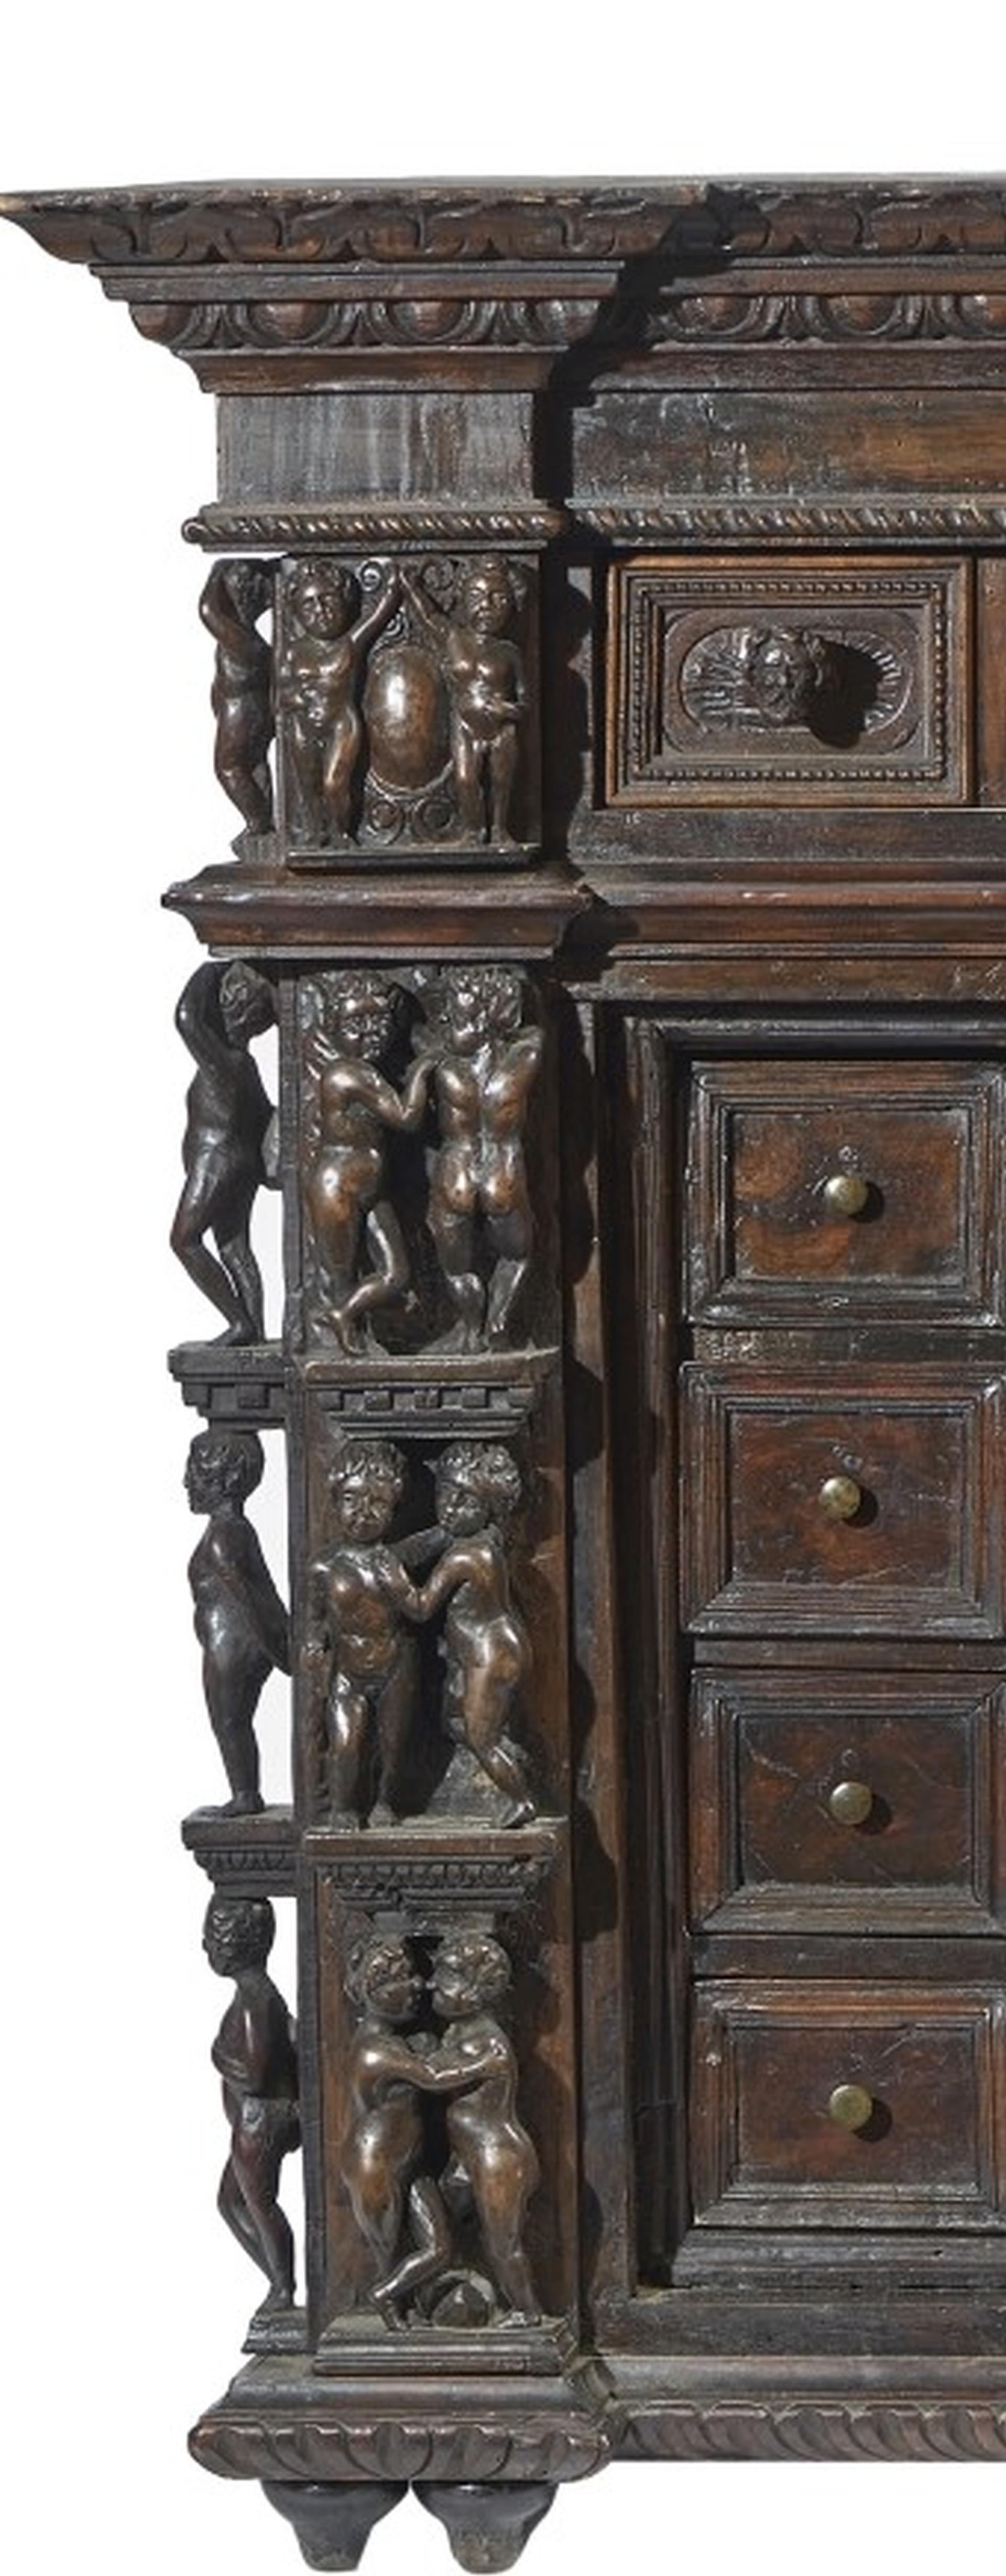 Cabinet of the seventeenth century. in Bambocci Genovese of the mid-17th century, measuring 185 x 115 x 55 cm, all carved in walnut with a refined workmanship on the sides and a meticulous and meticulous central construction of all the drawers;